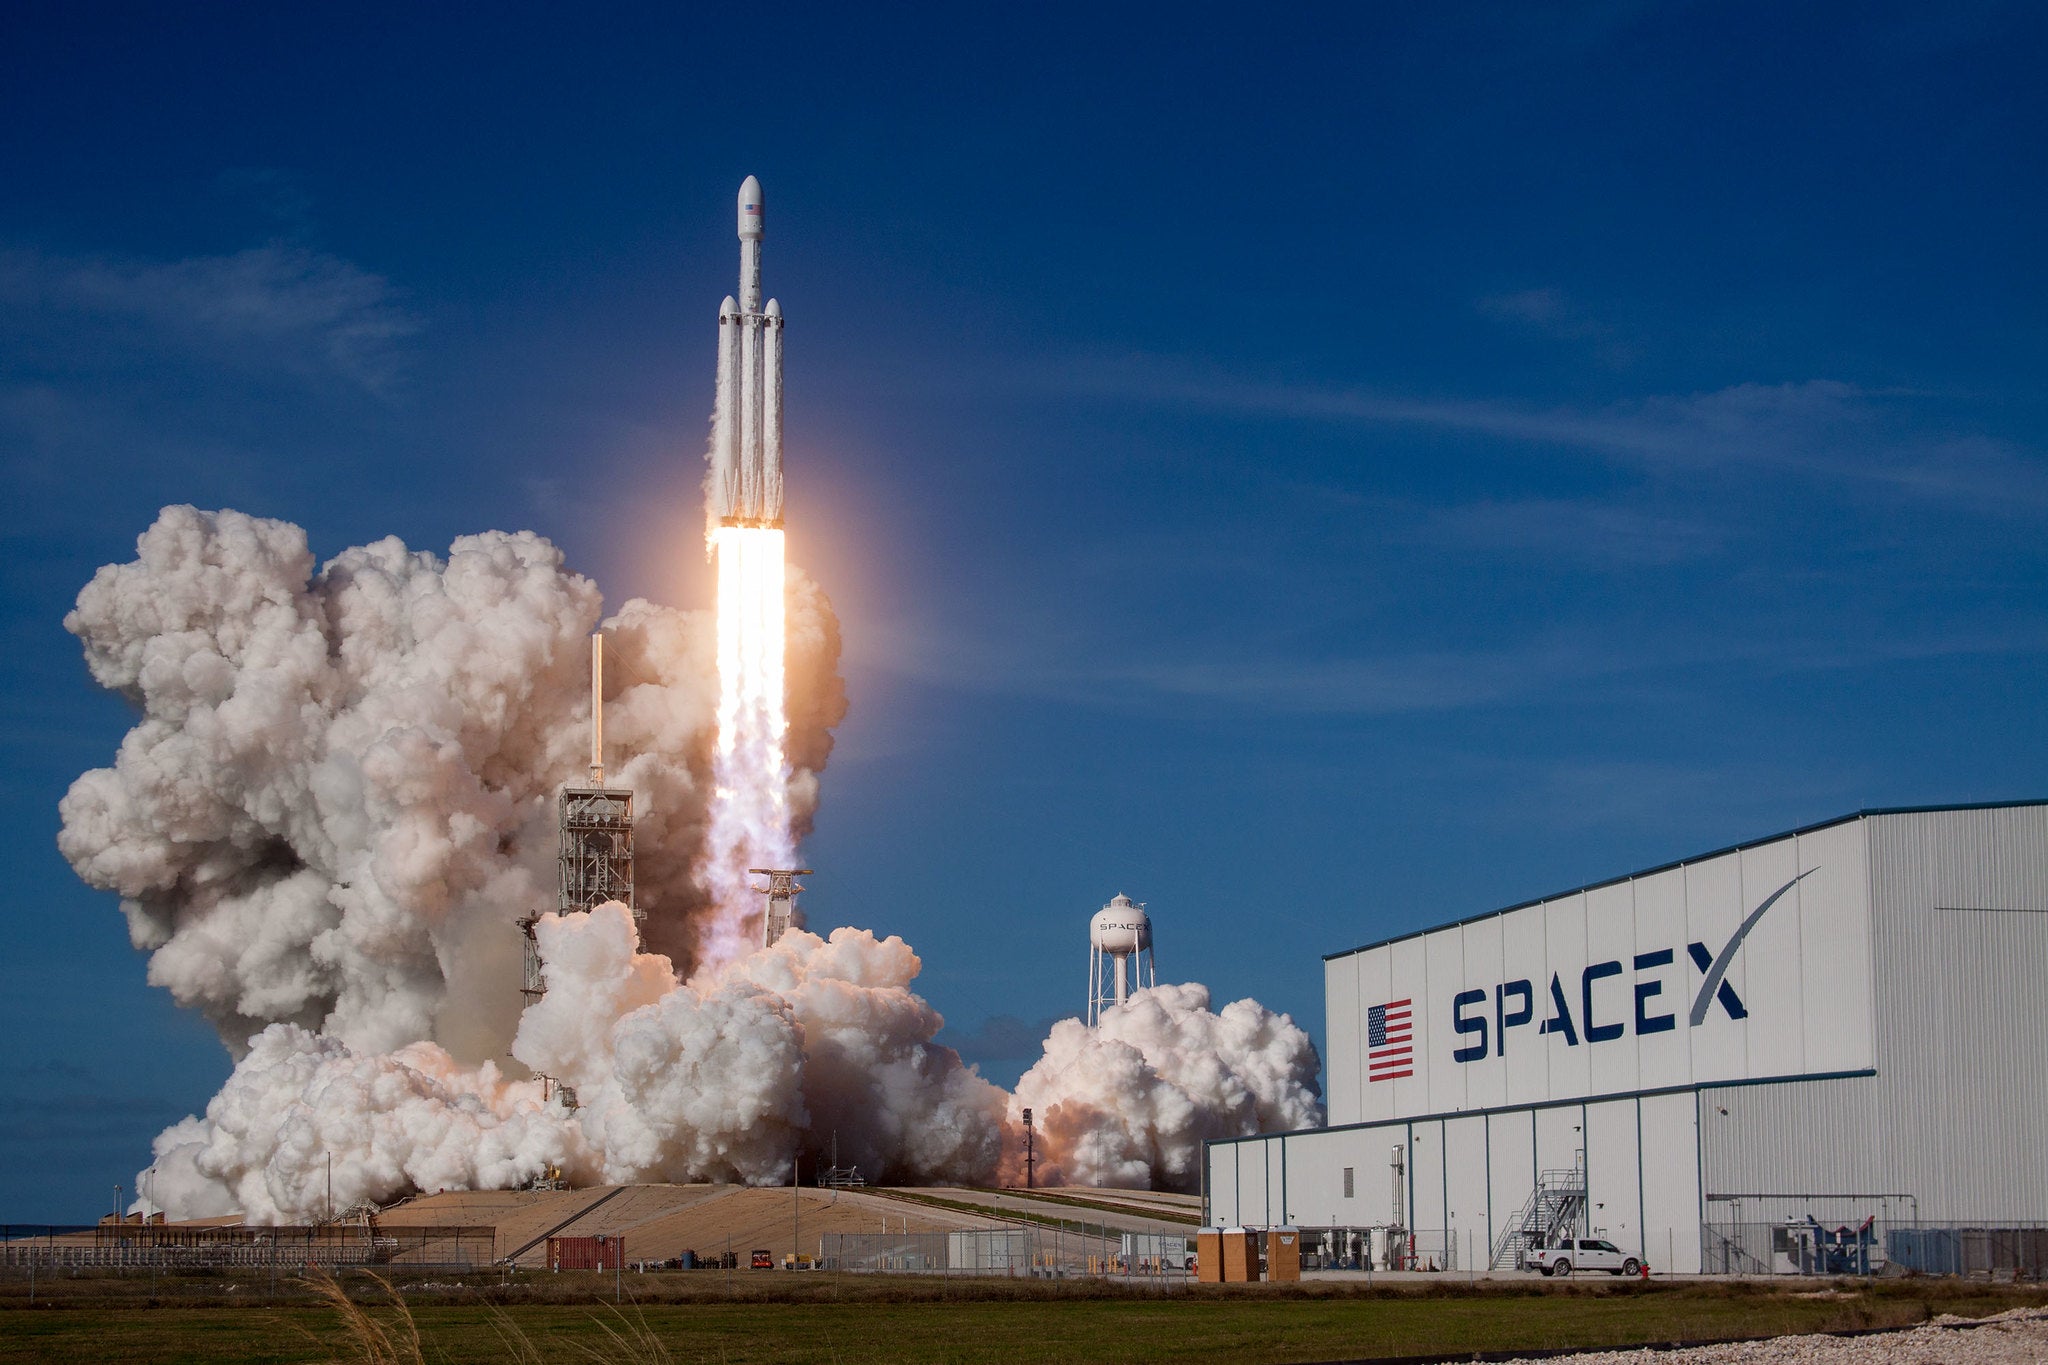 SpaceX will soon launch the powerful Falcon Heavy rocket for the first time since 2019